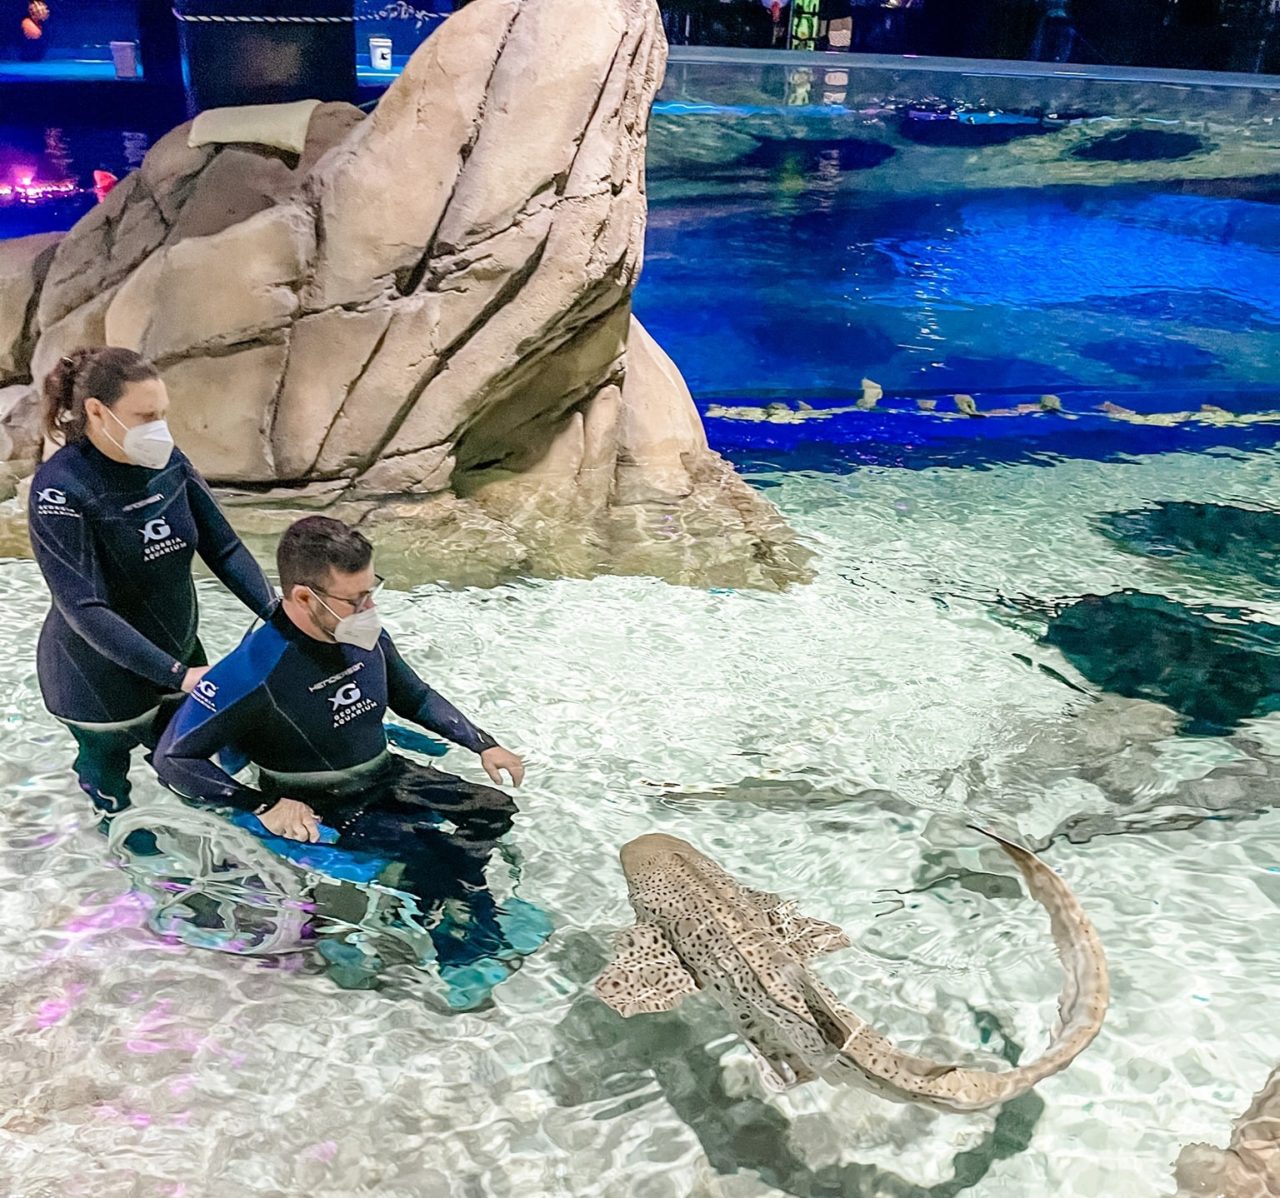 Shepherd patient and staff member enjoying recreational therapy at the aquarium.